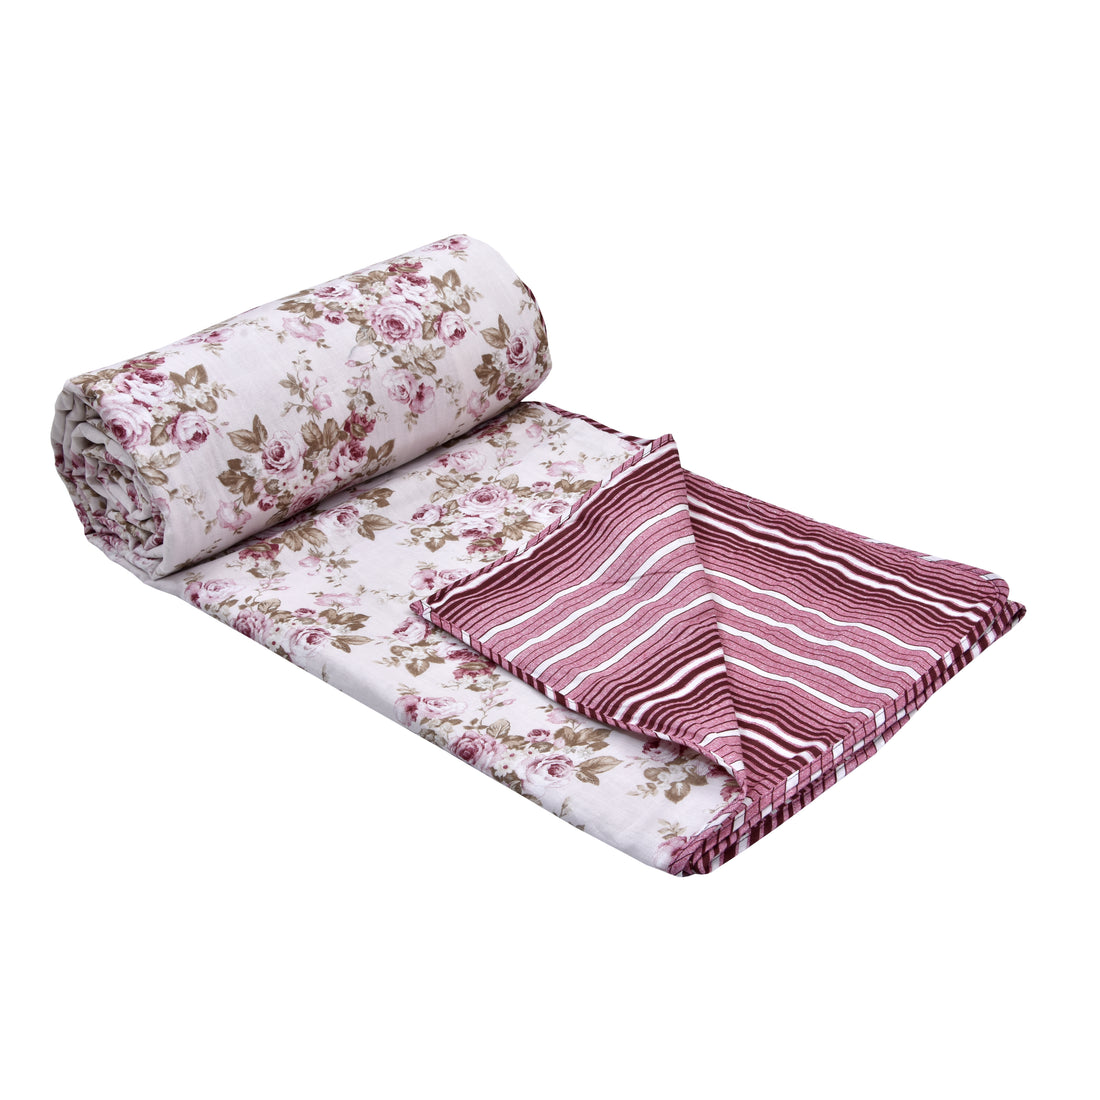 Dohar Cotton-Double Bed- Pink Roses